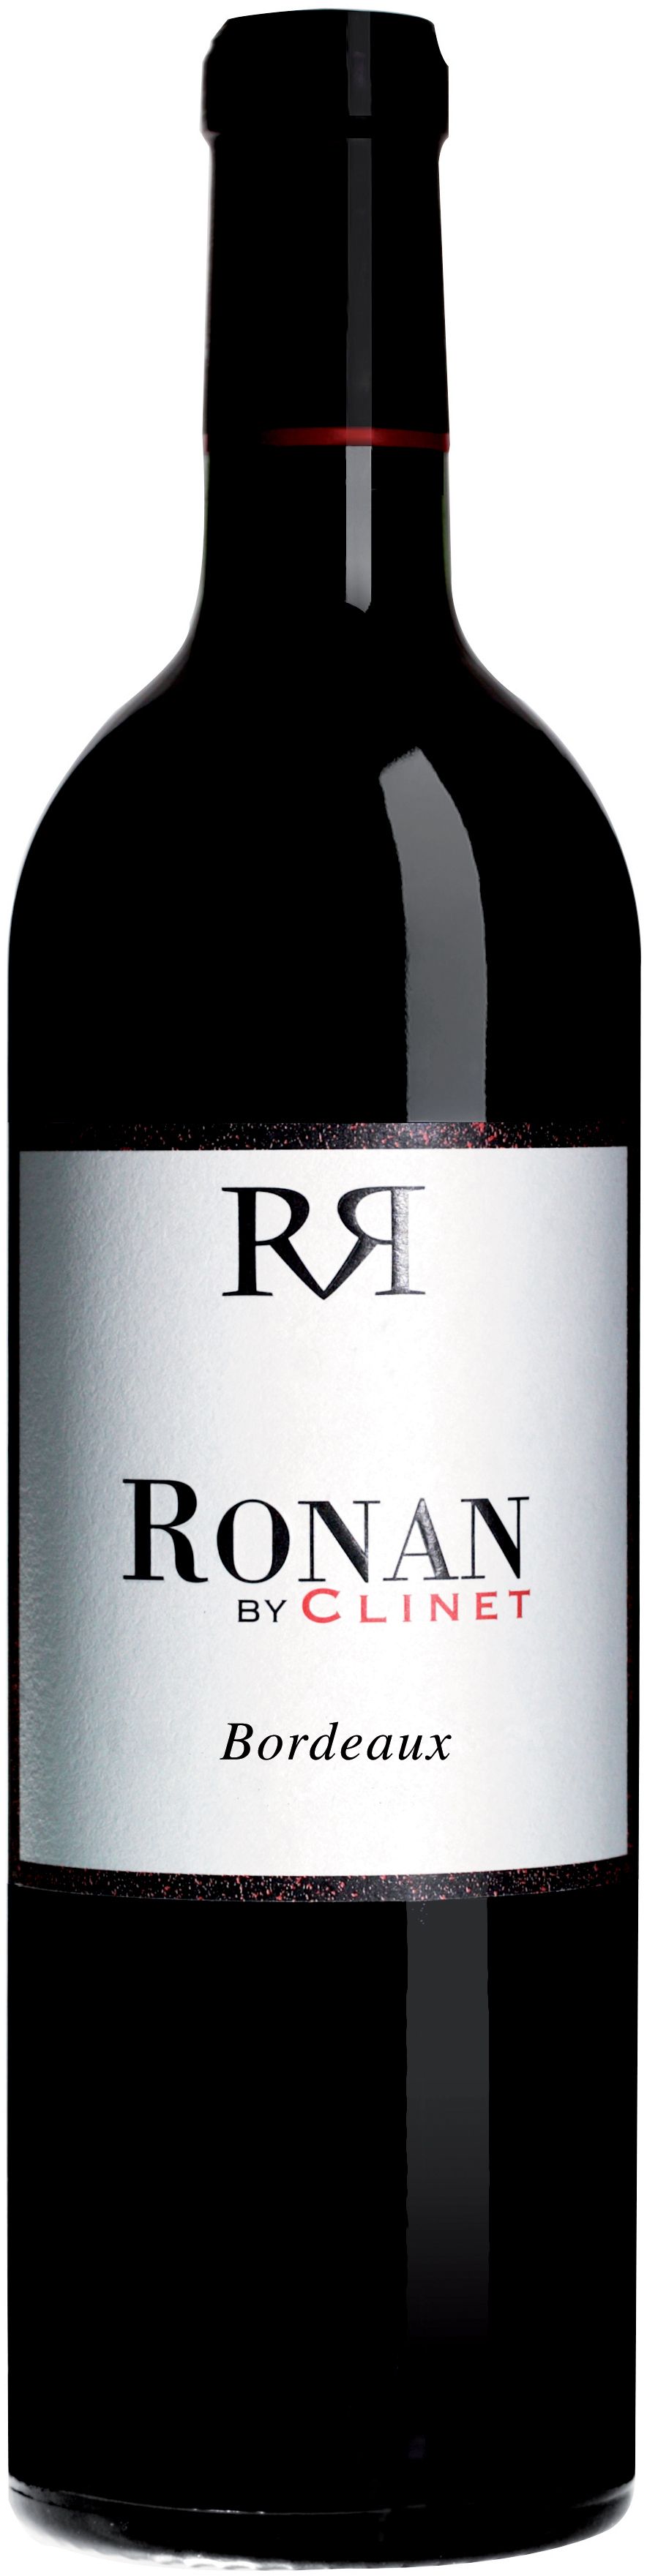 Chateau Clinet, Ronan By Clinet Rouge, 2013